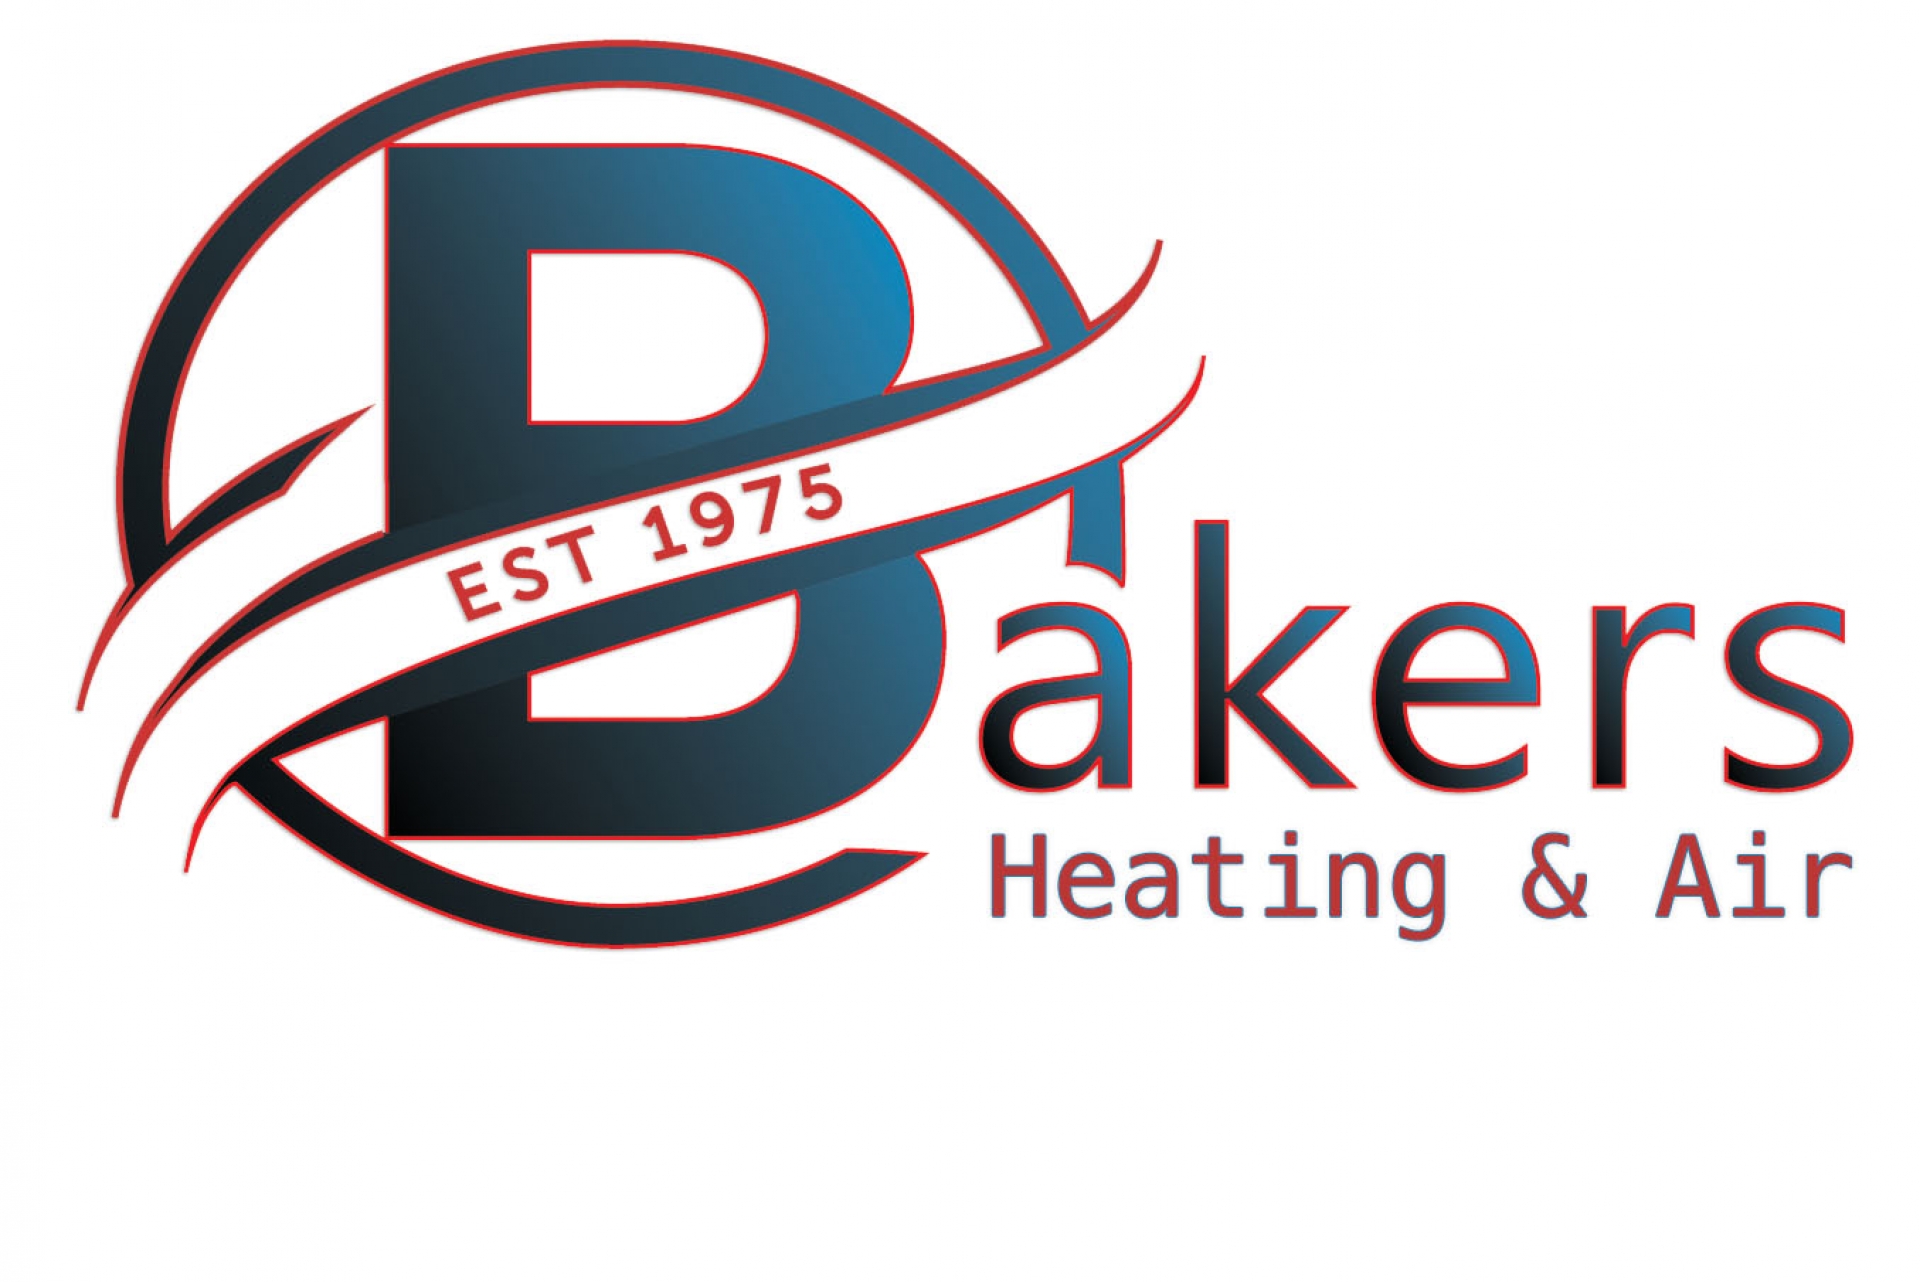 Baker's Heating and Air Conditioning logo